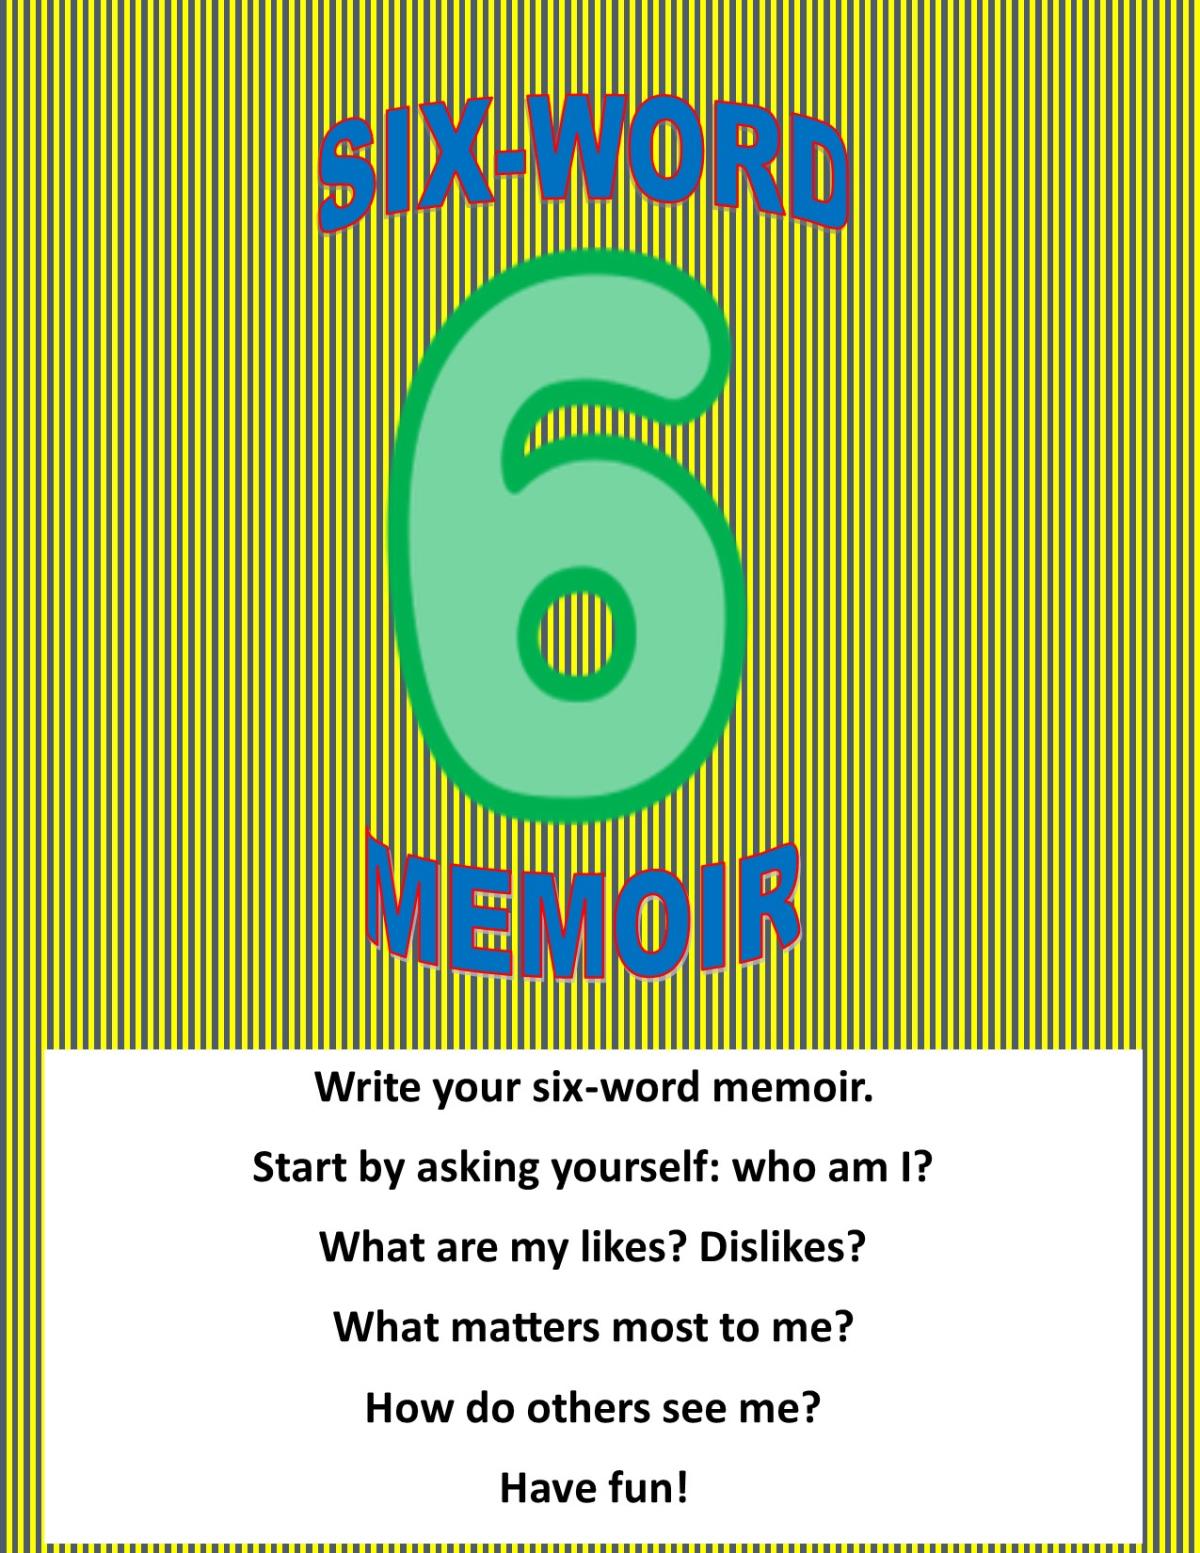 Come and create your 6-word memoir. A paper-covered table and colored pens are provided.